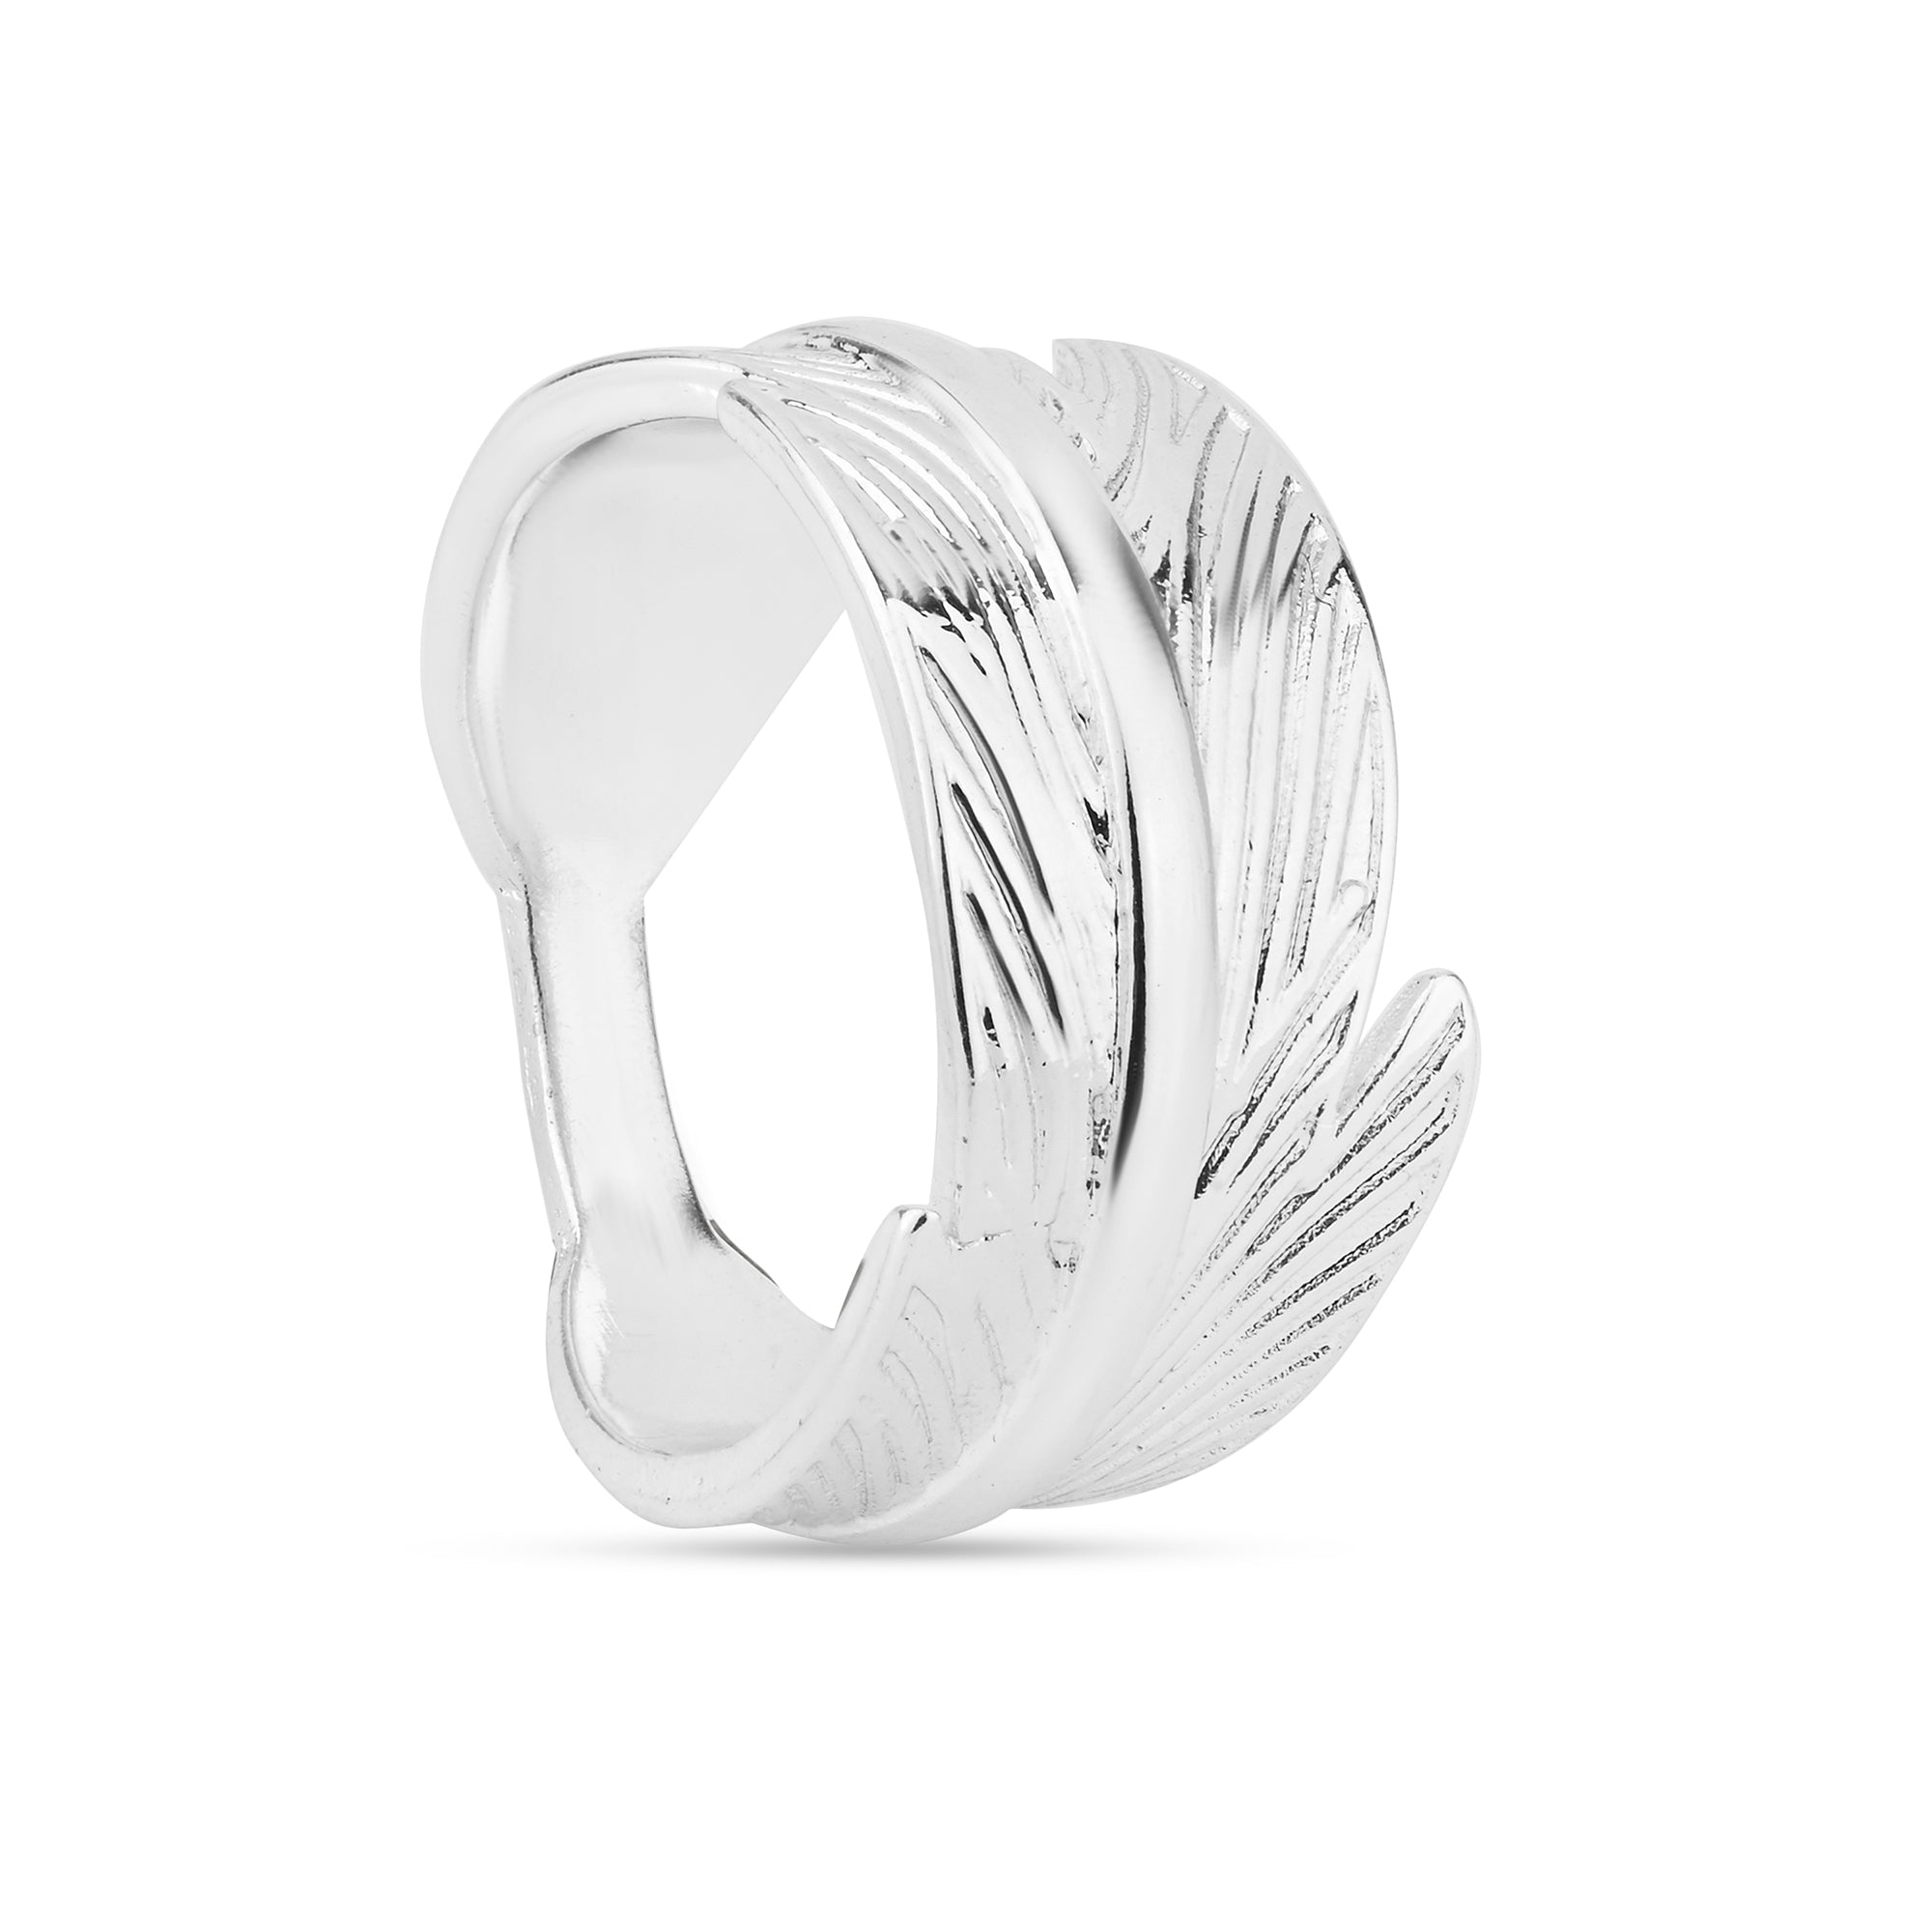 Small Silver-Plated Feather Ring